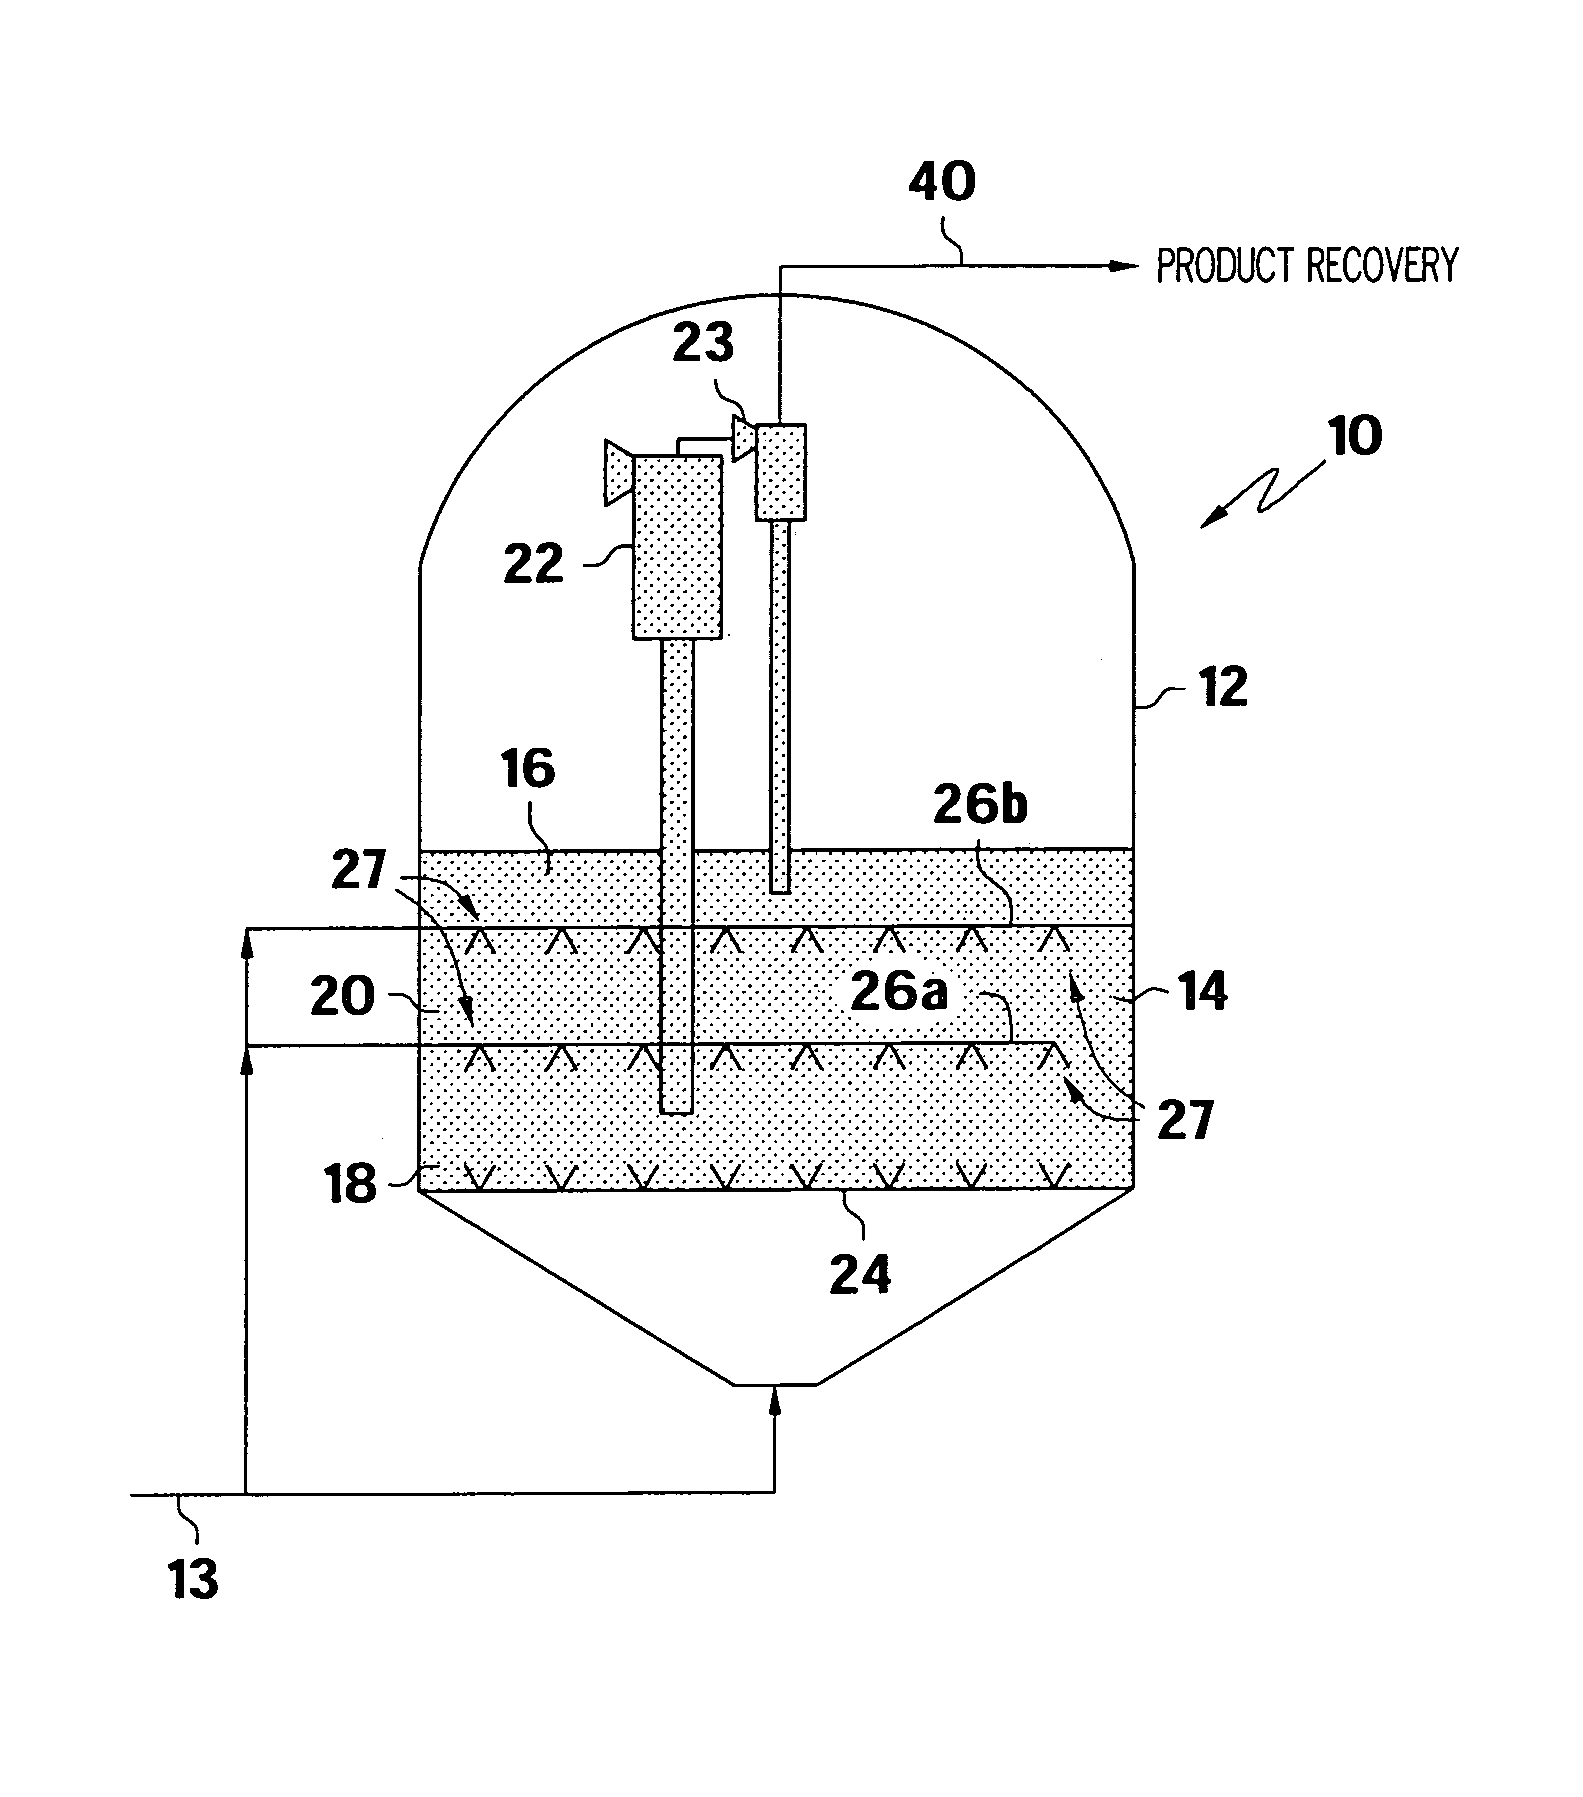 Conversion of oxygenate to olefins with staged injection of oxygenate